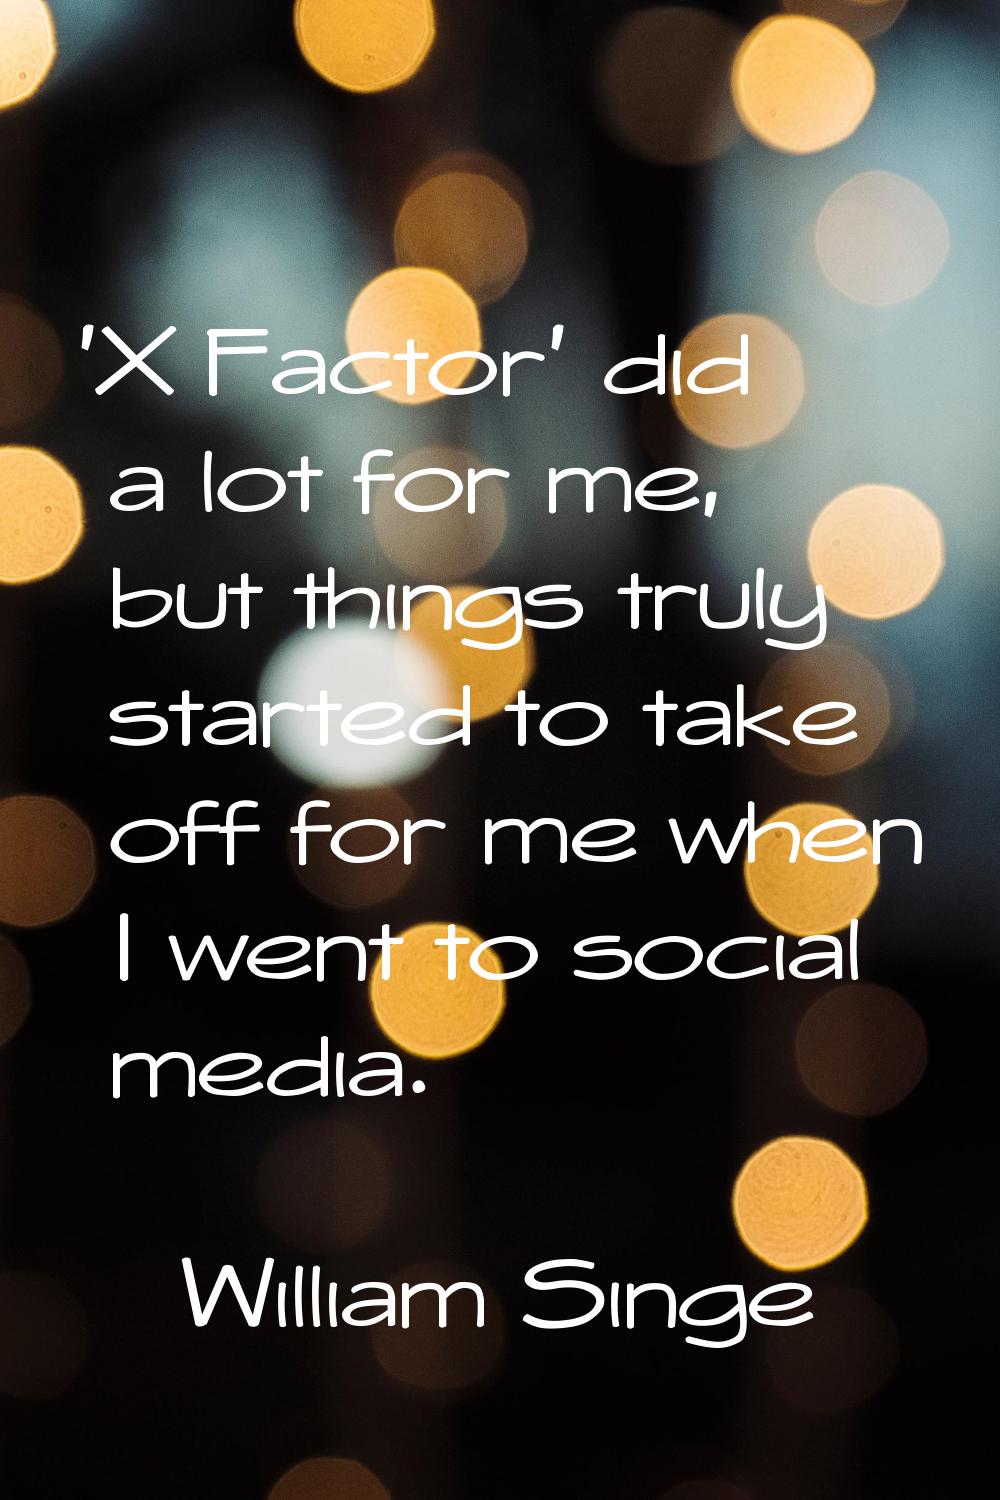 'X Factor' did a lot for me, but things truly started to take off for me when I went to social medi